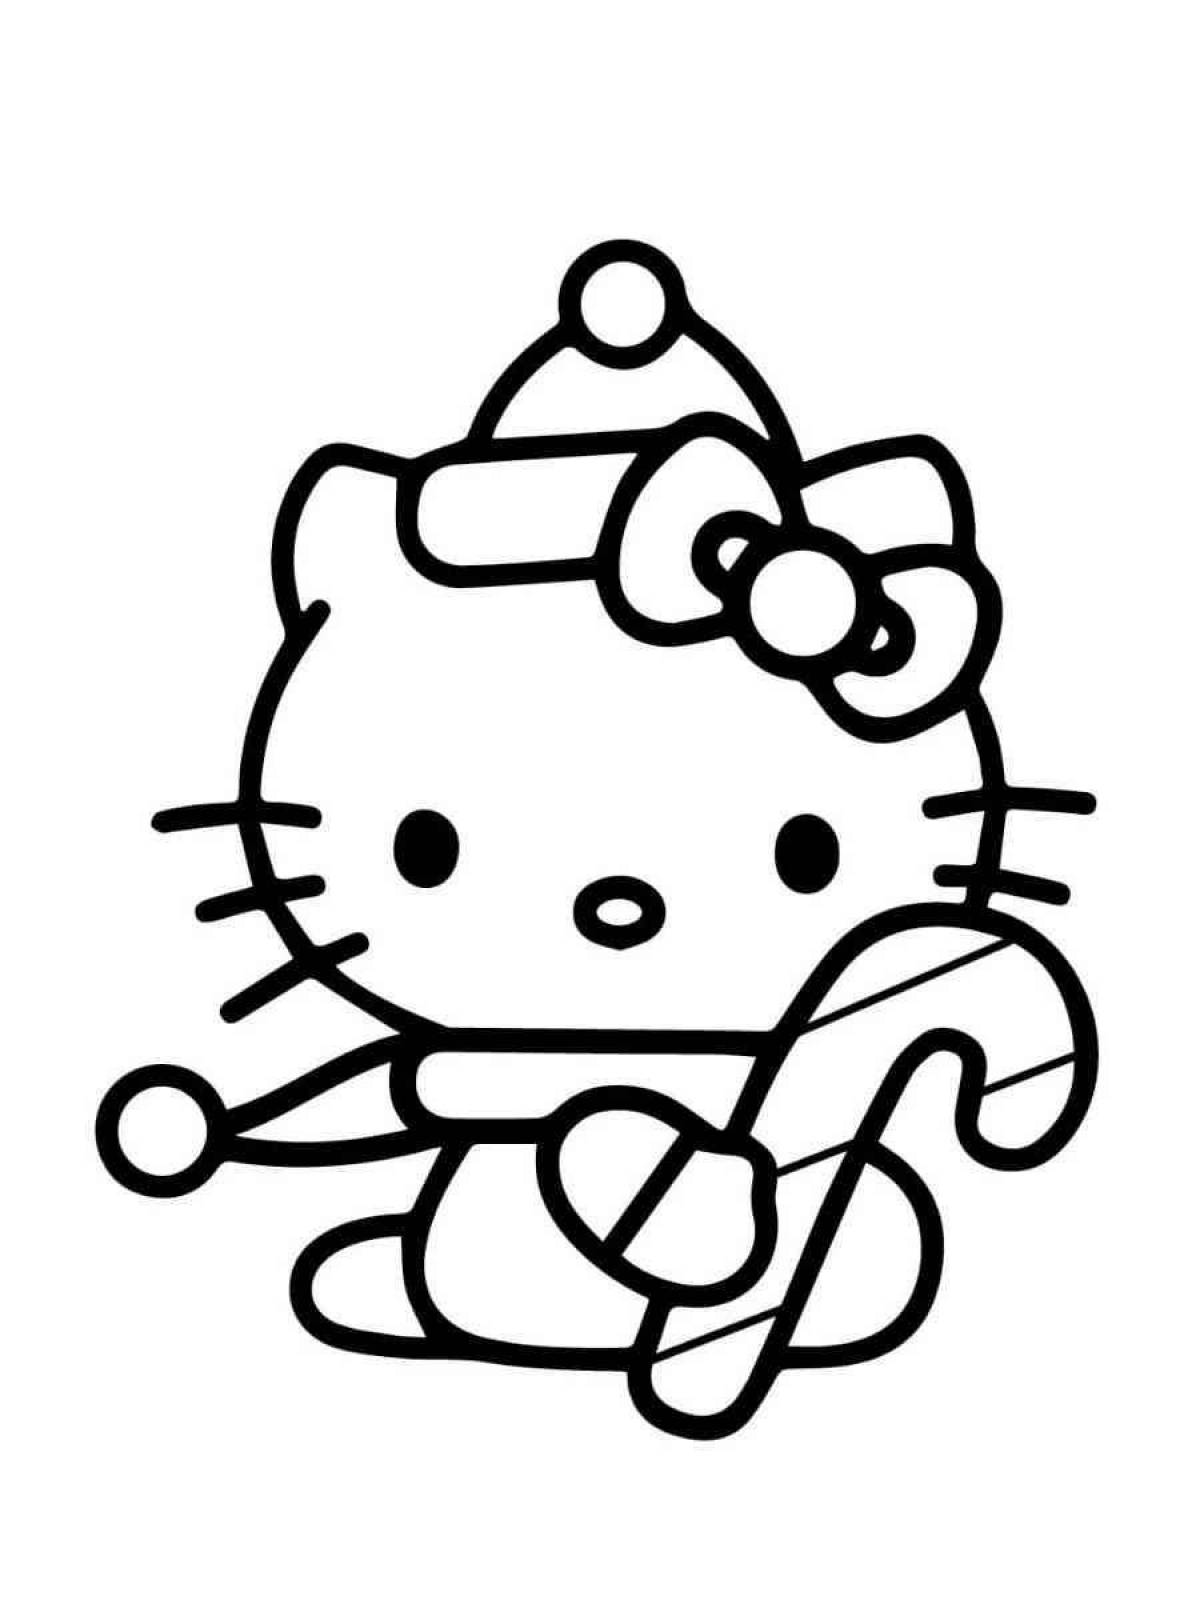 Kuromi sparkling head coloring page